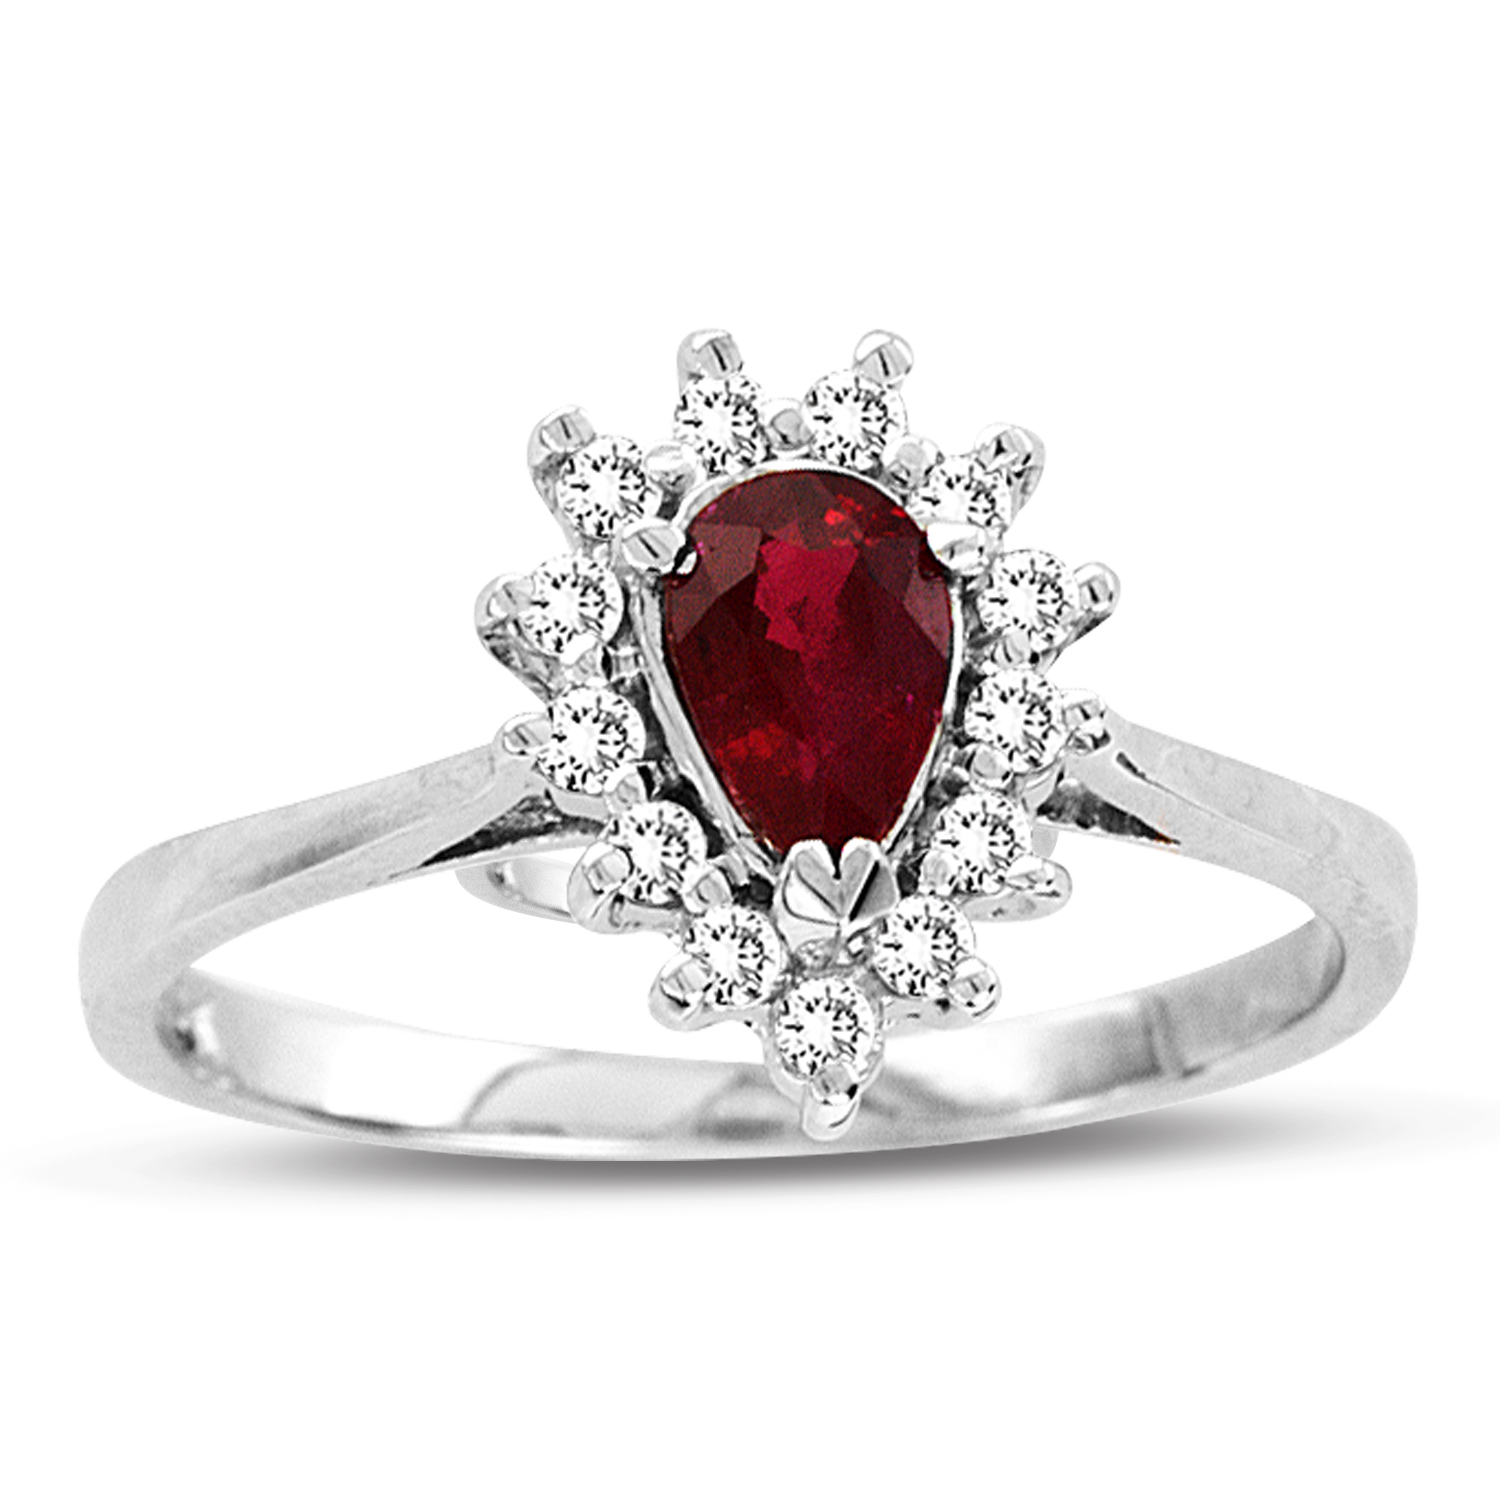 View 0.65ct tw Pear Shaped Natural Heated Ruby and Diamond Ring in 14k Gold